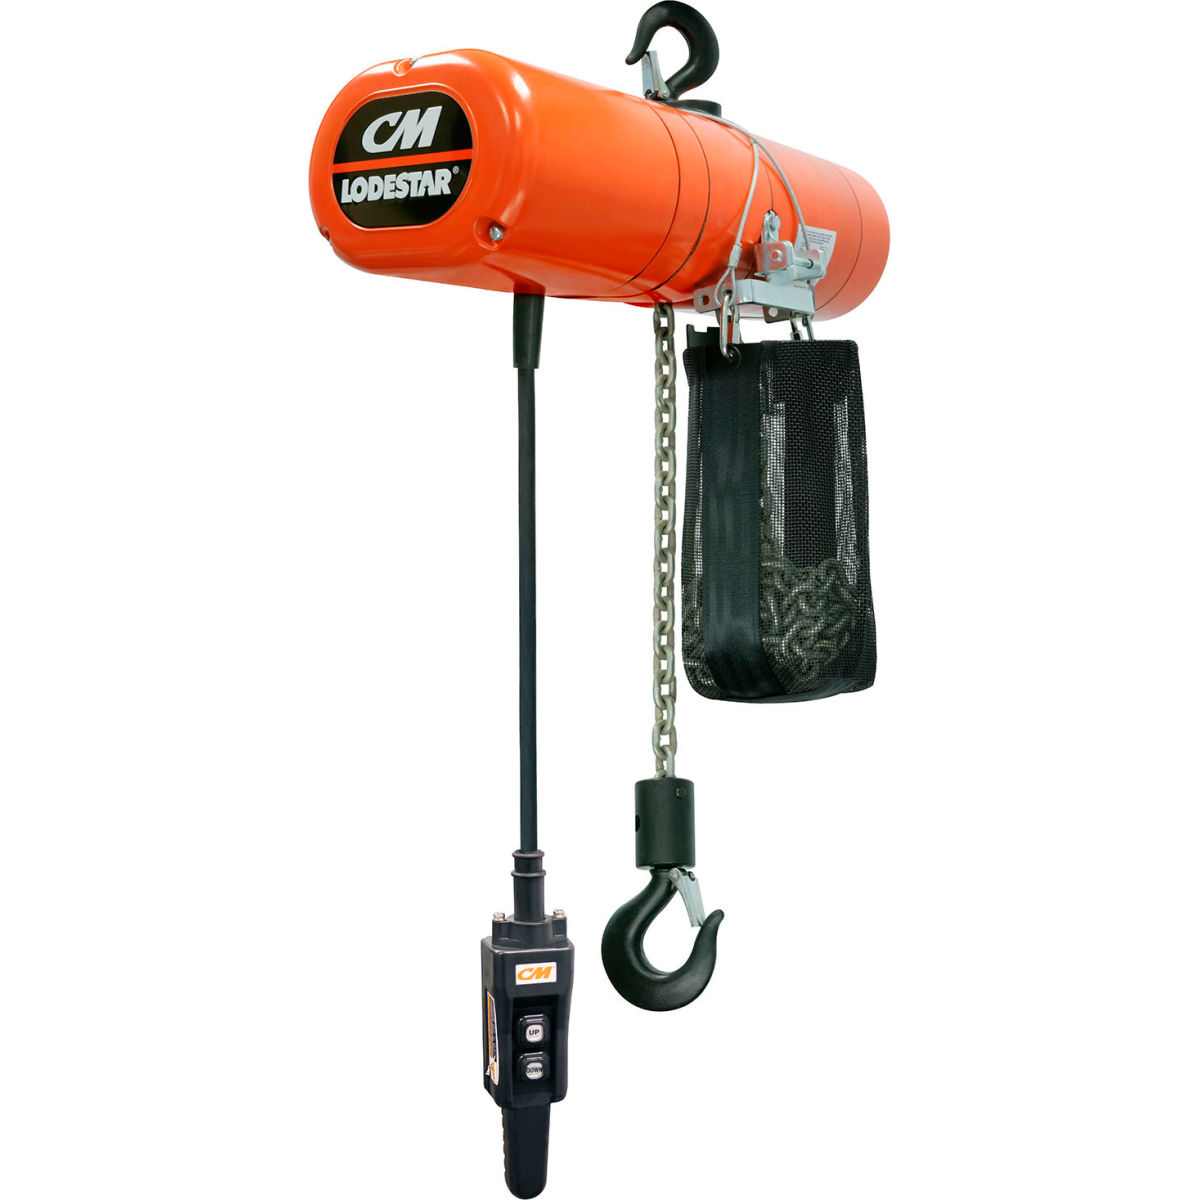 Picture of Columbus Mckinnon B1299514 16 FPM&#44; 115V Lodestar 1 Ton&#44; Electric Chain Hoist with Chain Container & 20 ft. Lift